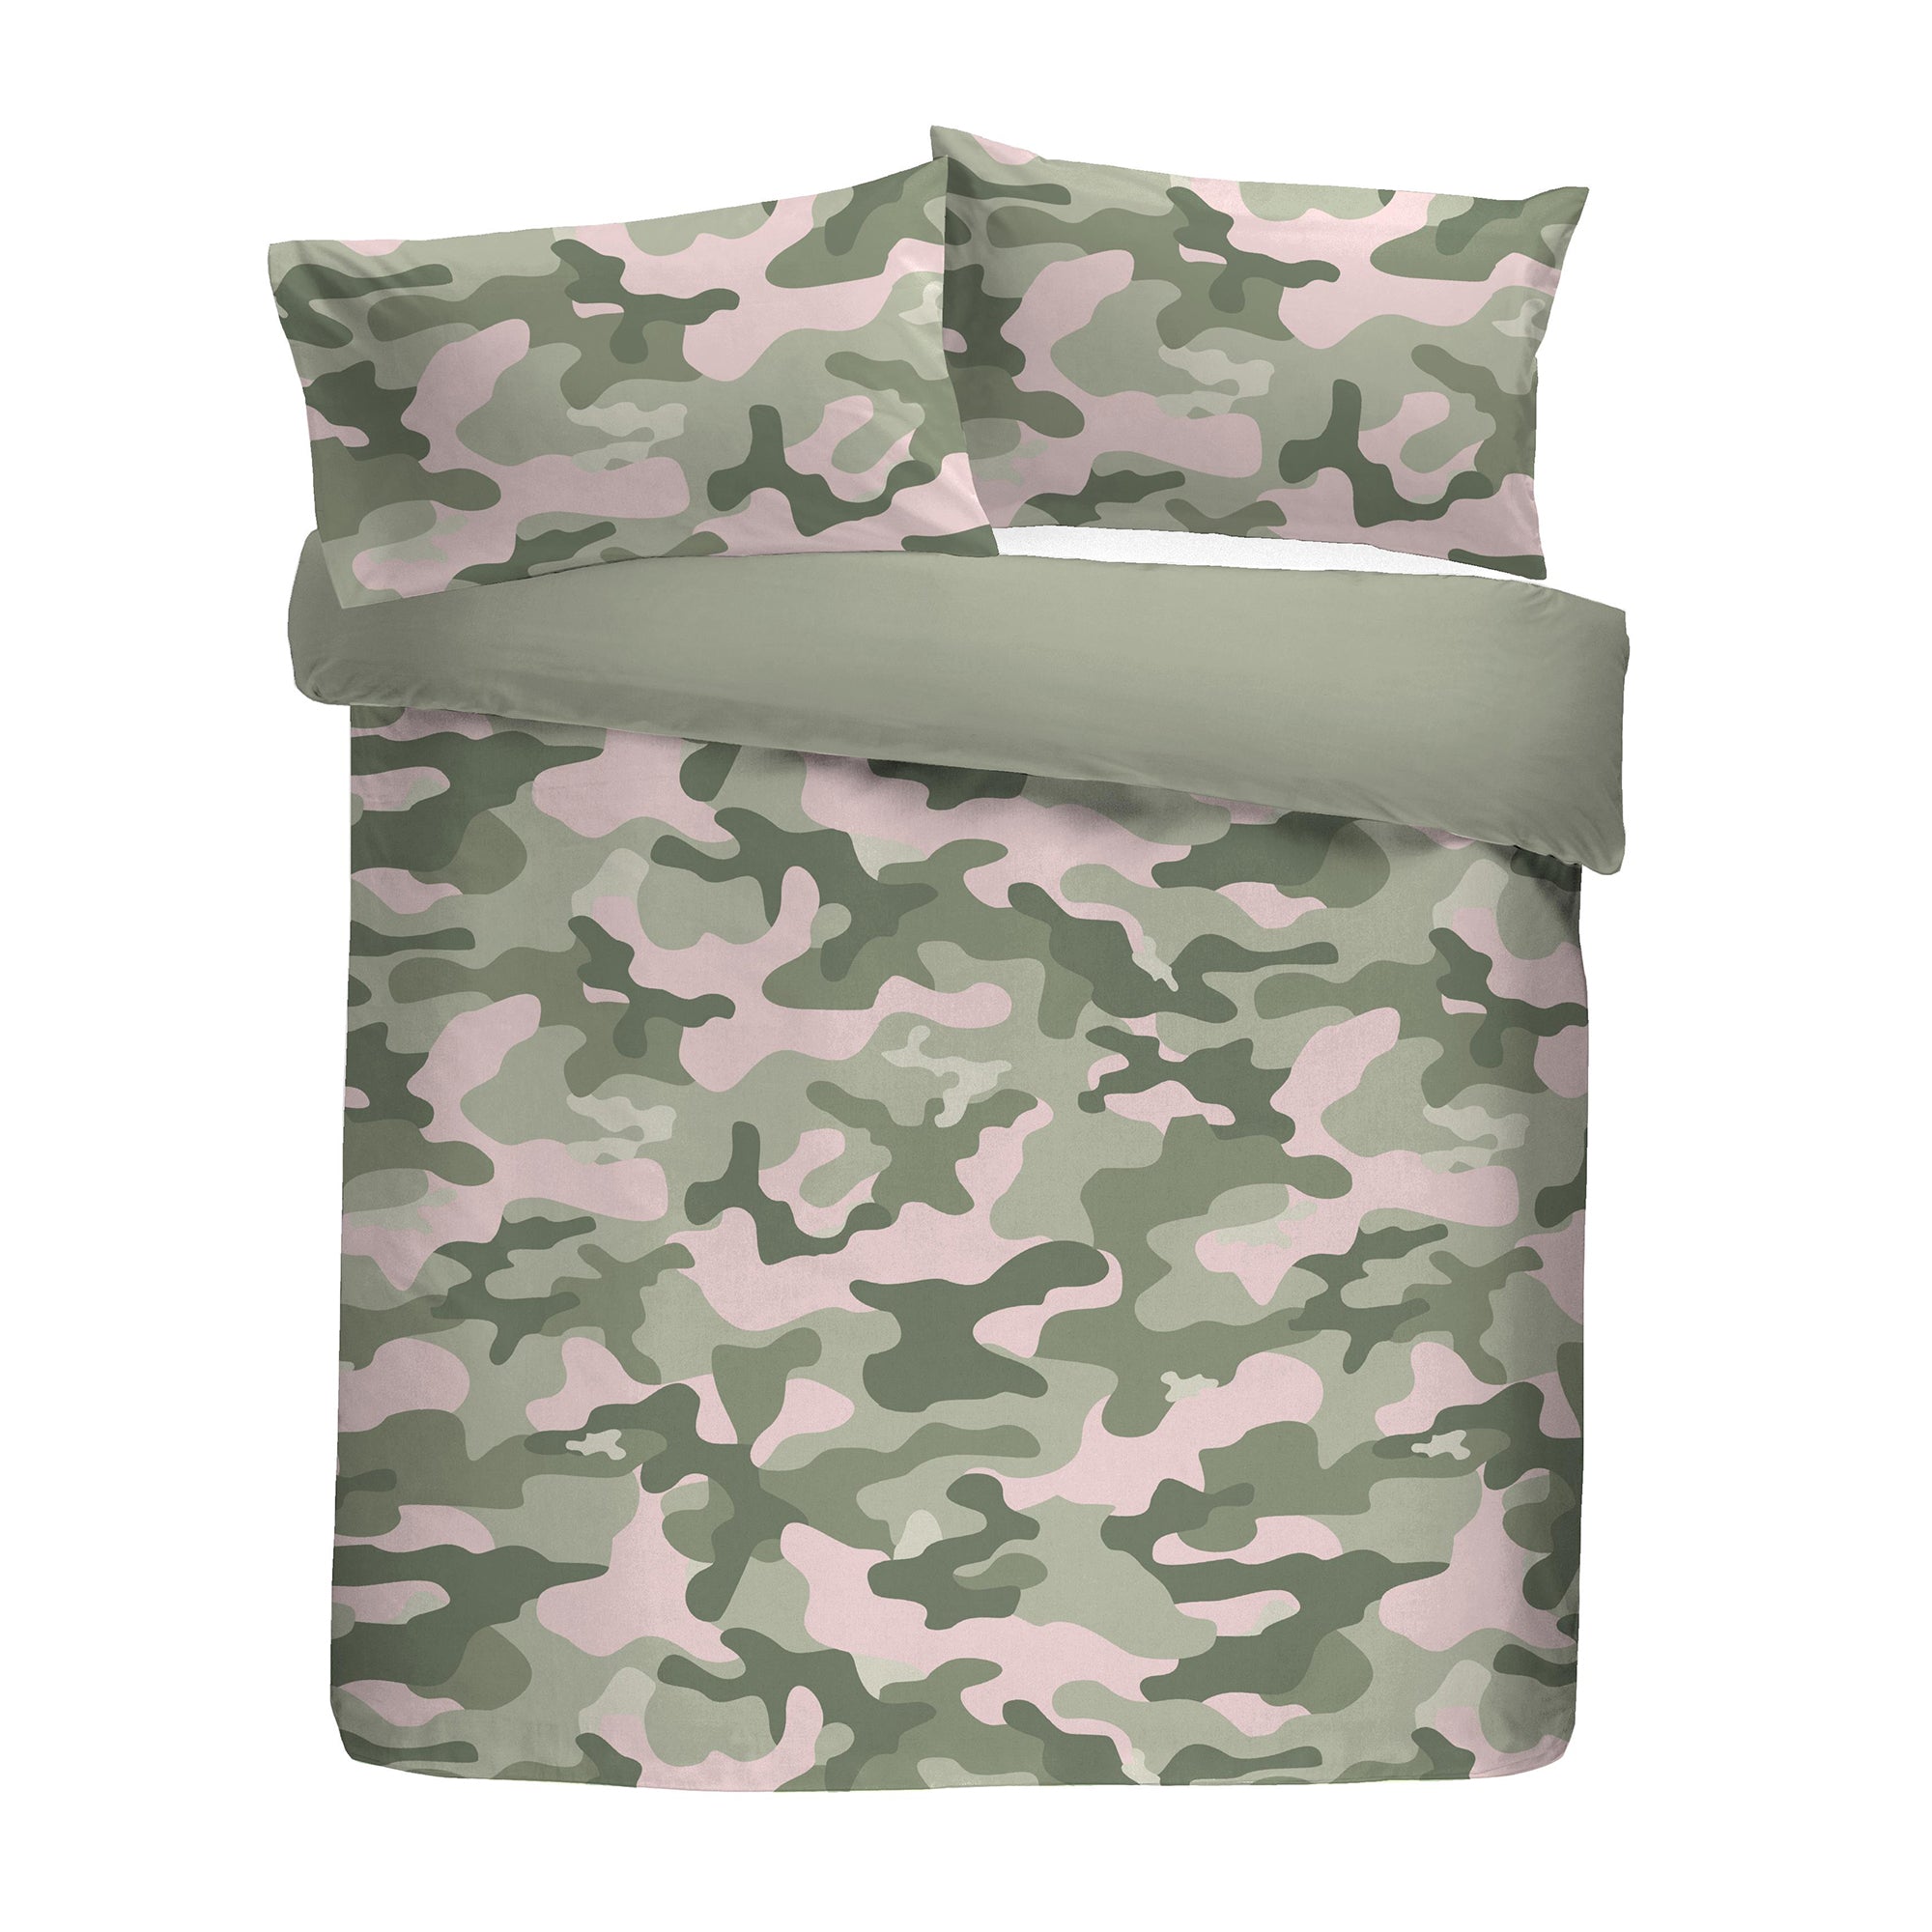 Camouflage - Easy Care Duvet Cover Set, Curtains & Fitted Sheets in Pink - by Bedlam